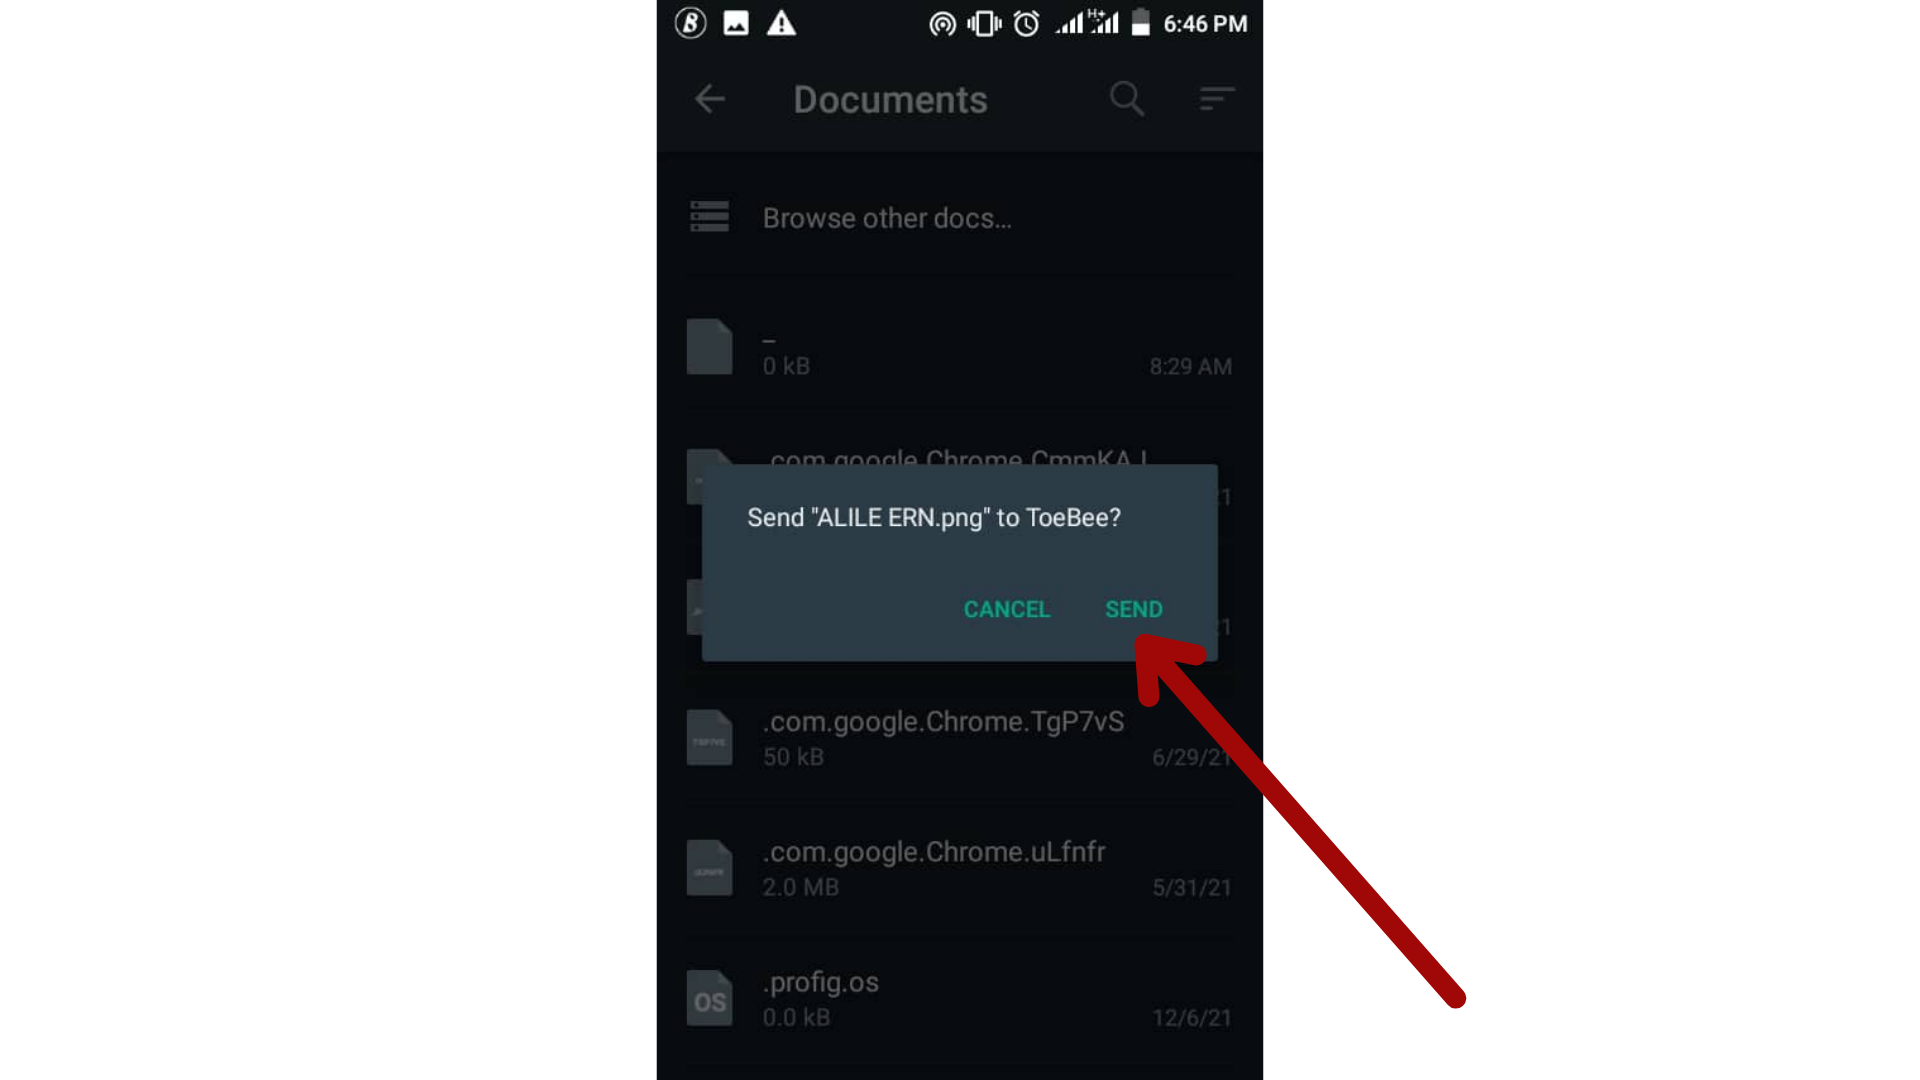 Share files as Document on Whatsapp